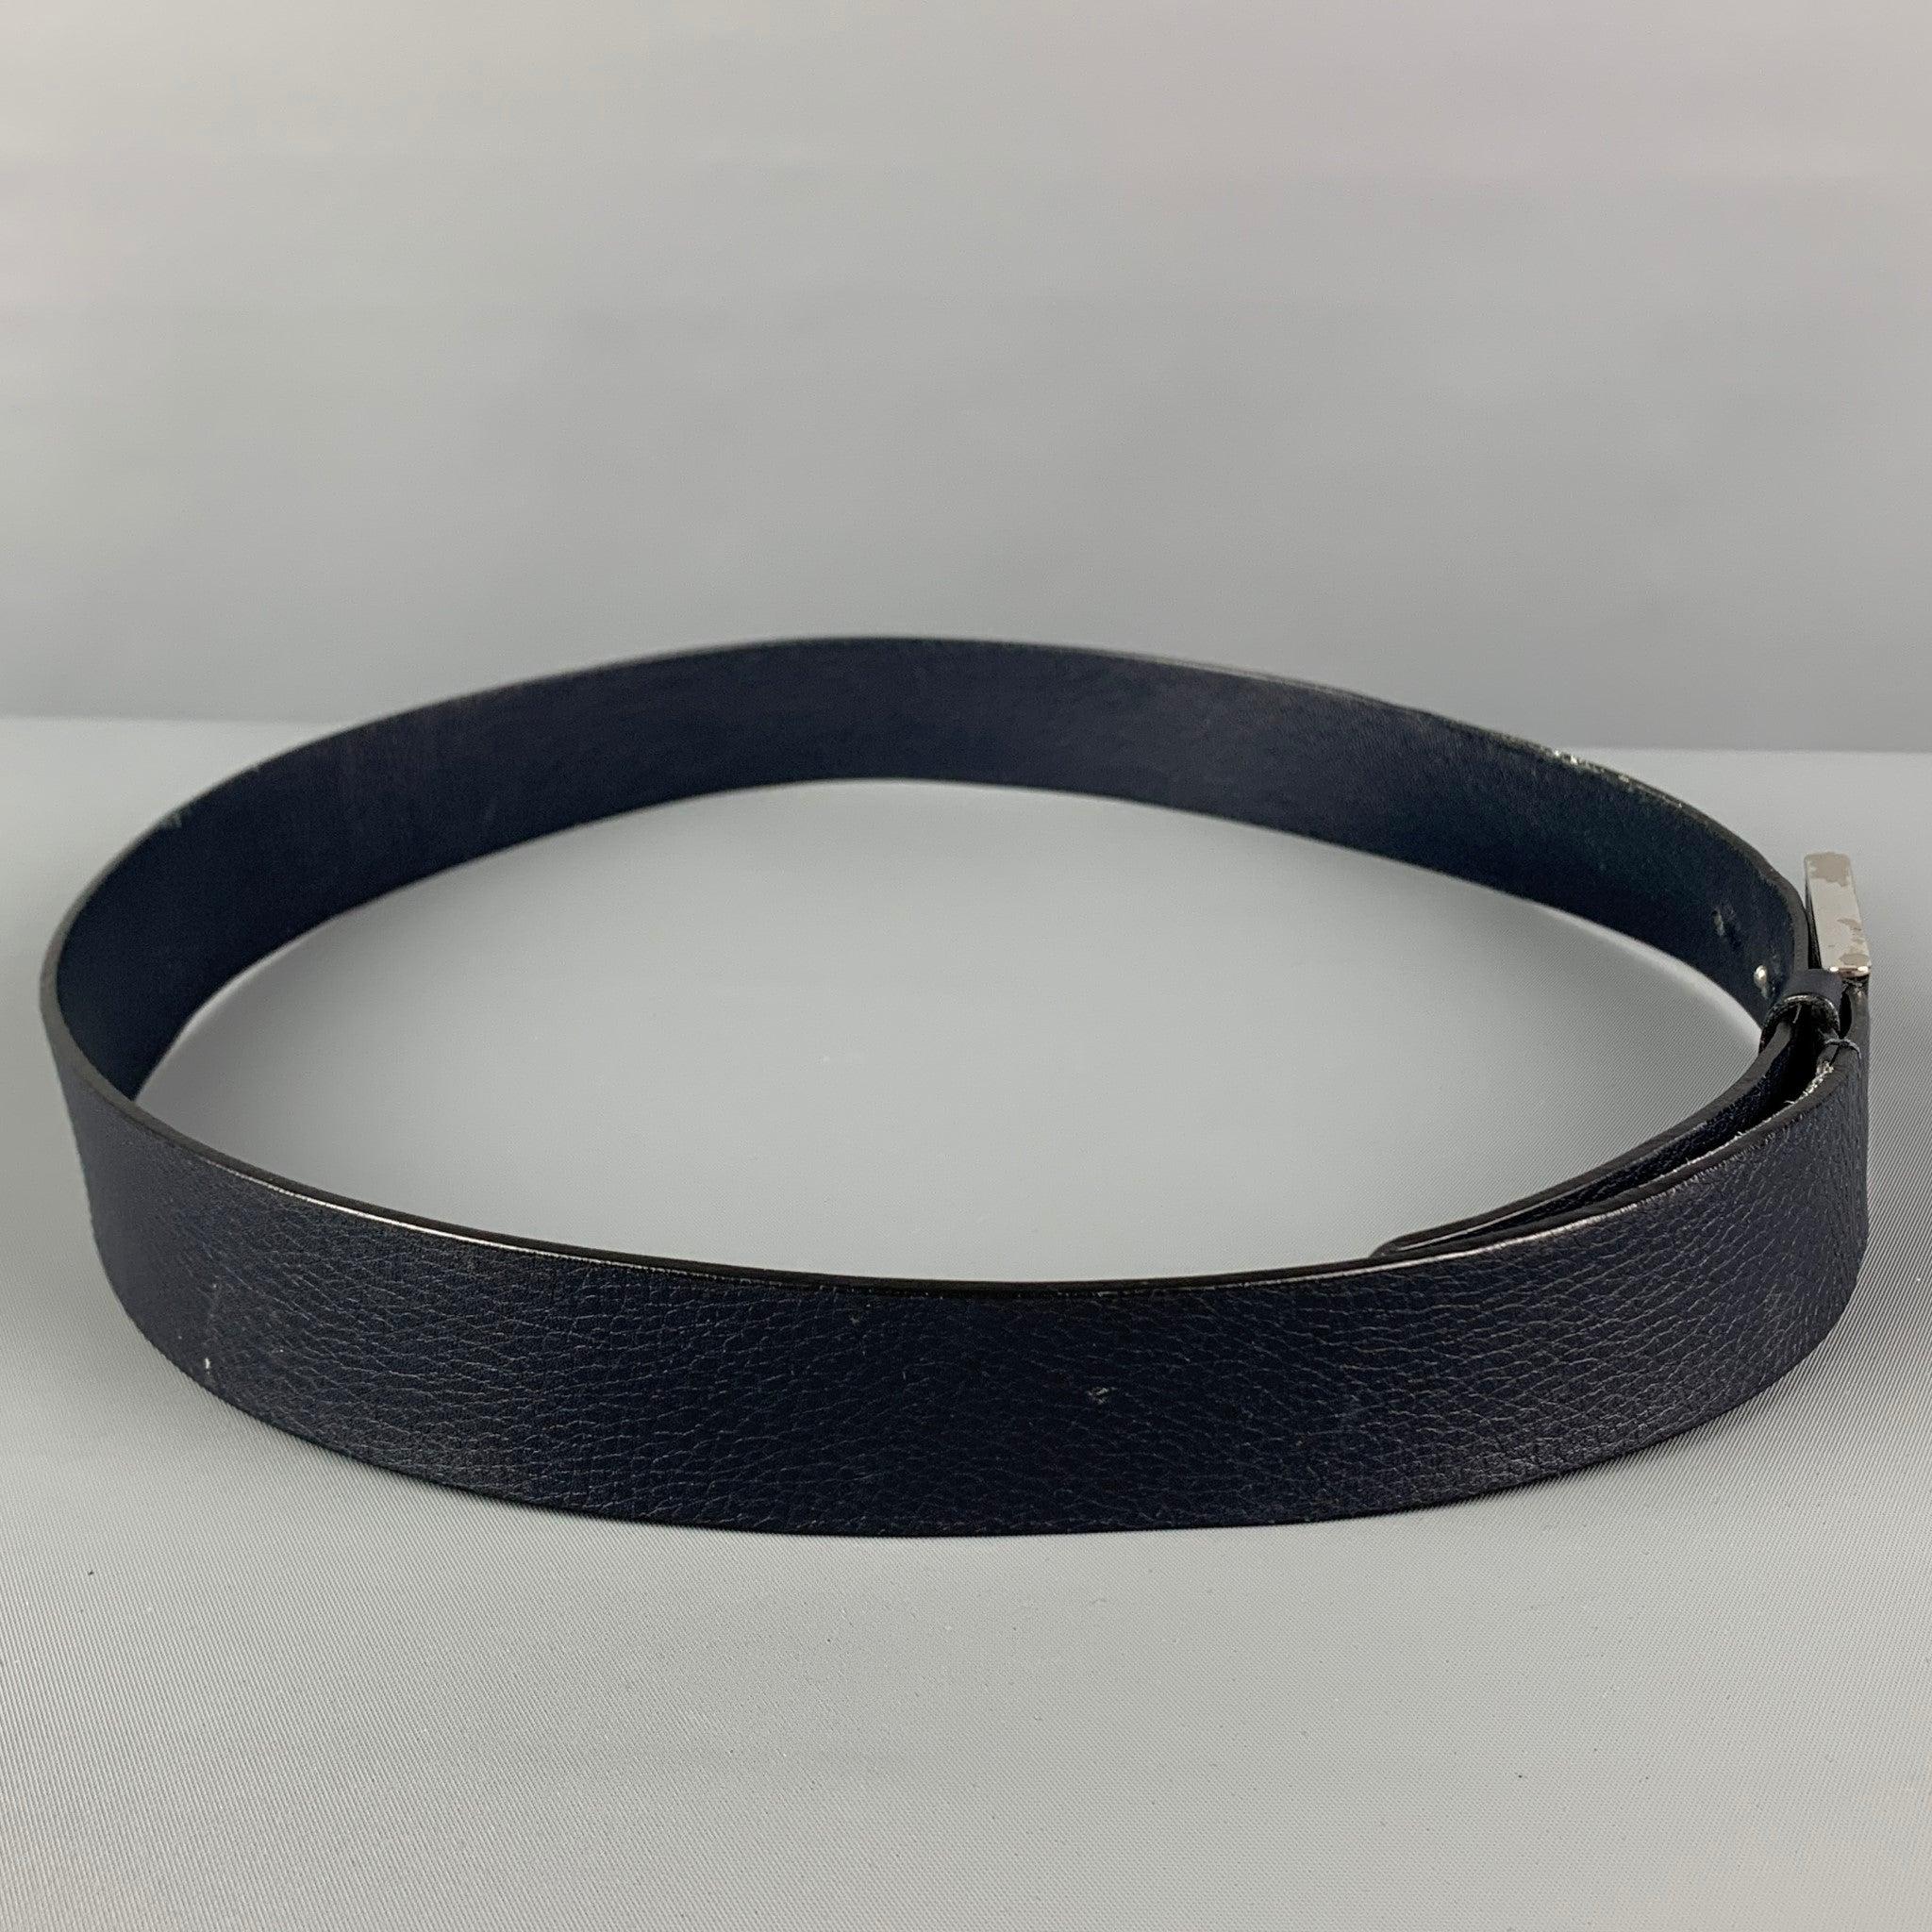 GUCCI belt comes in a navy textured leather featuring a covered buckle closure. Made in Italy.
 Very Good
 Pre-Owned Condition. 
 

 Marked:  368188 A7M0N 95-38 1766Length: 42 inches Width: 1.25 inches Fits: 36.5 inches - 40.5 inches Buckle: 2.25